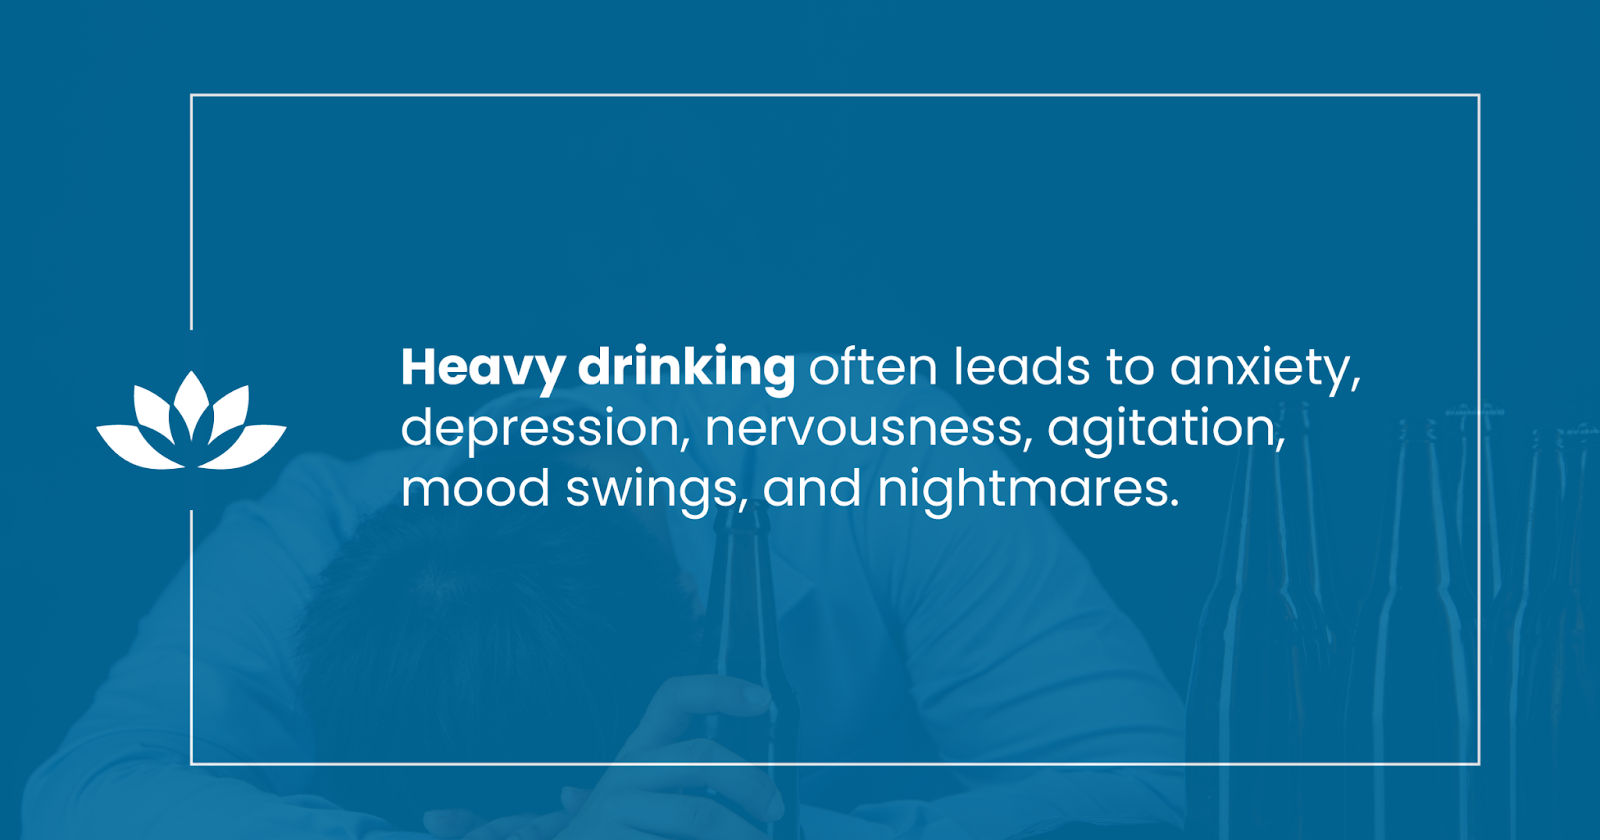 heavy drinking often leads to anxiety depression and nightmares alcohol rehab drug rehab 